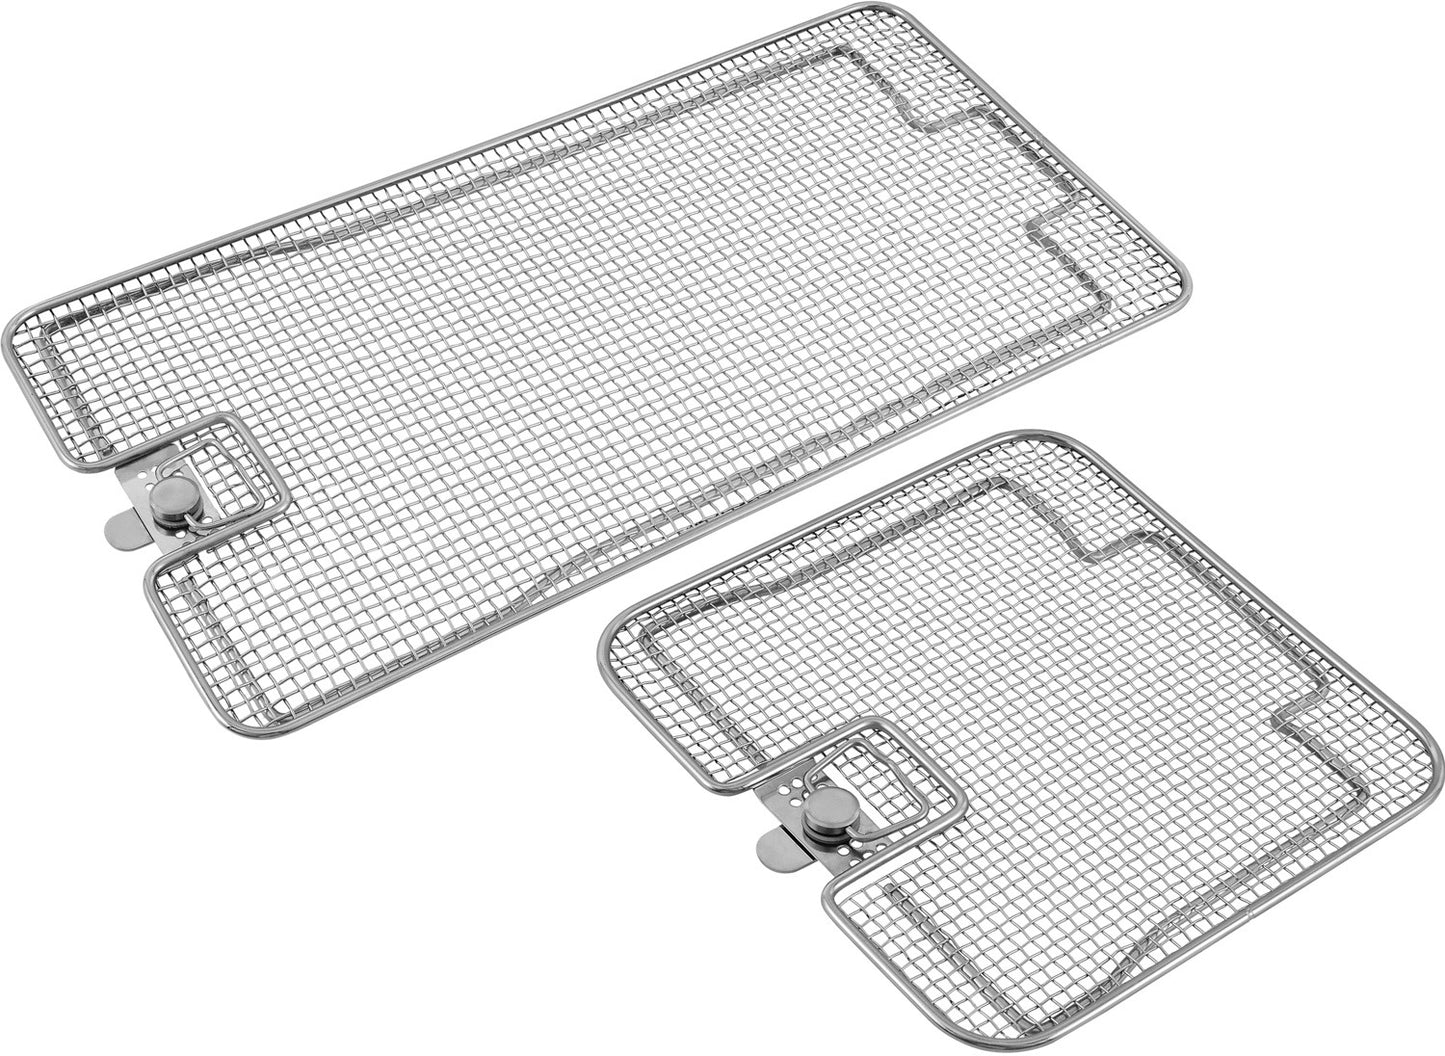 Lids for Crimped Wire Mesh Sterilization Baskets, Double Frame-WP-4457DCW